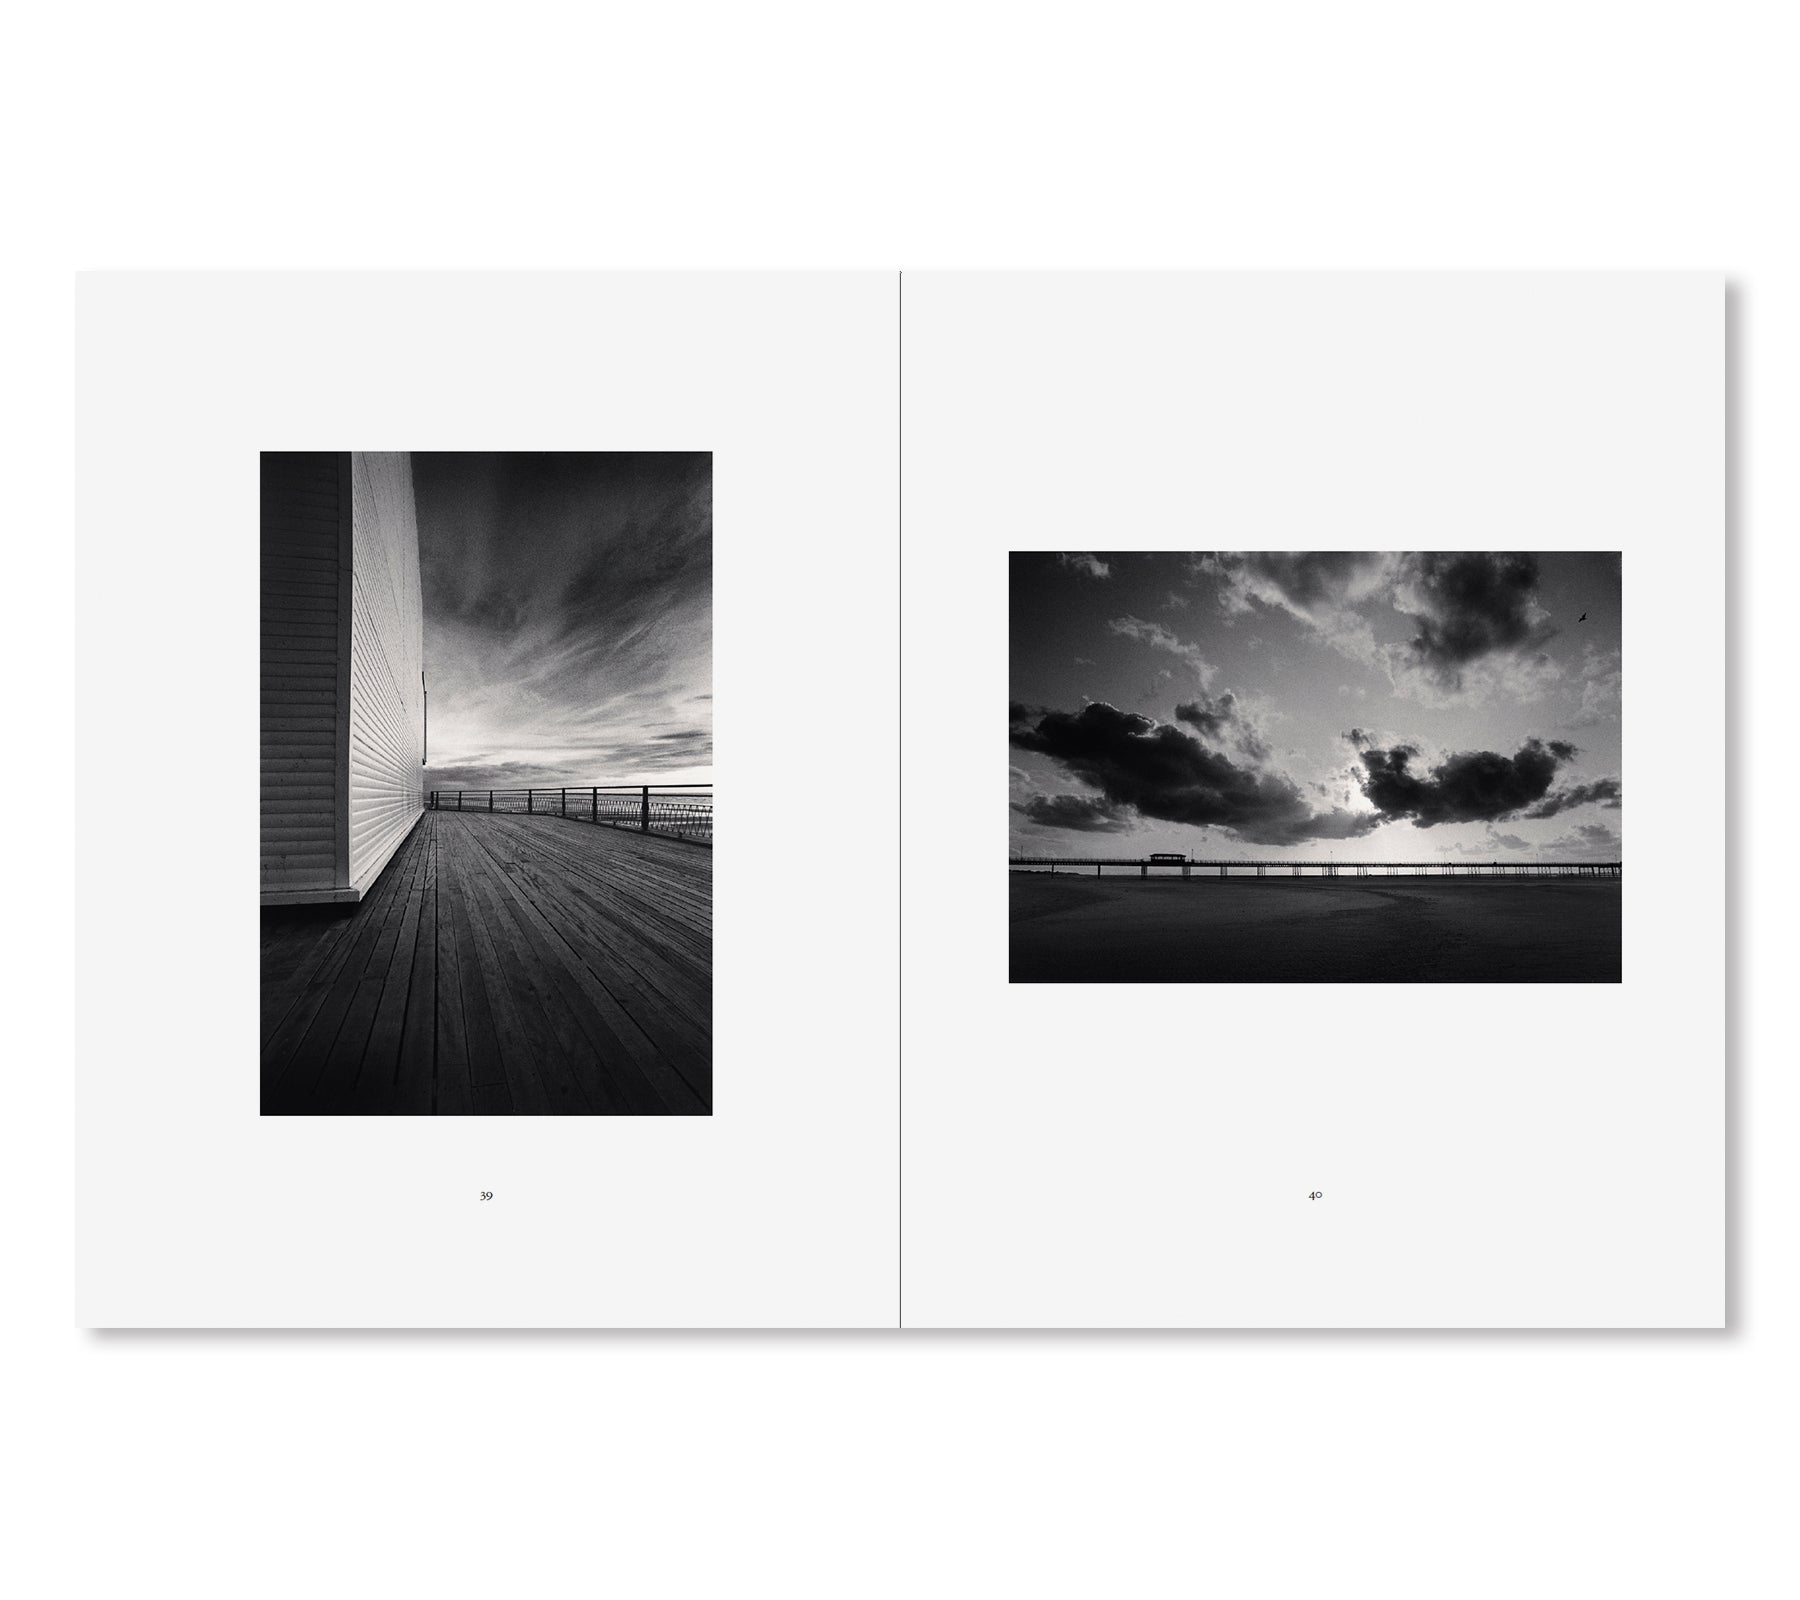 NORTHERN ENGLAND 1983-1986 by Michael Kenna